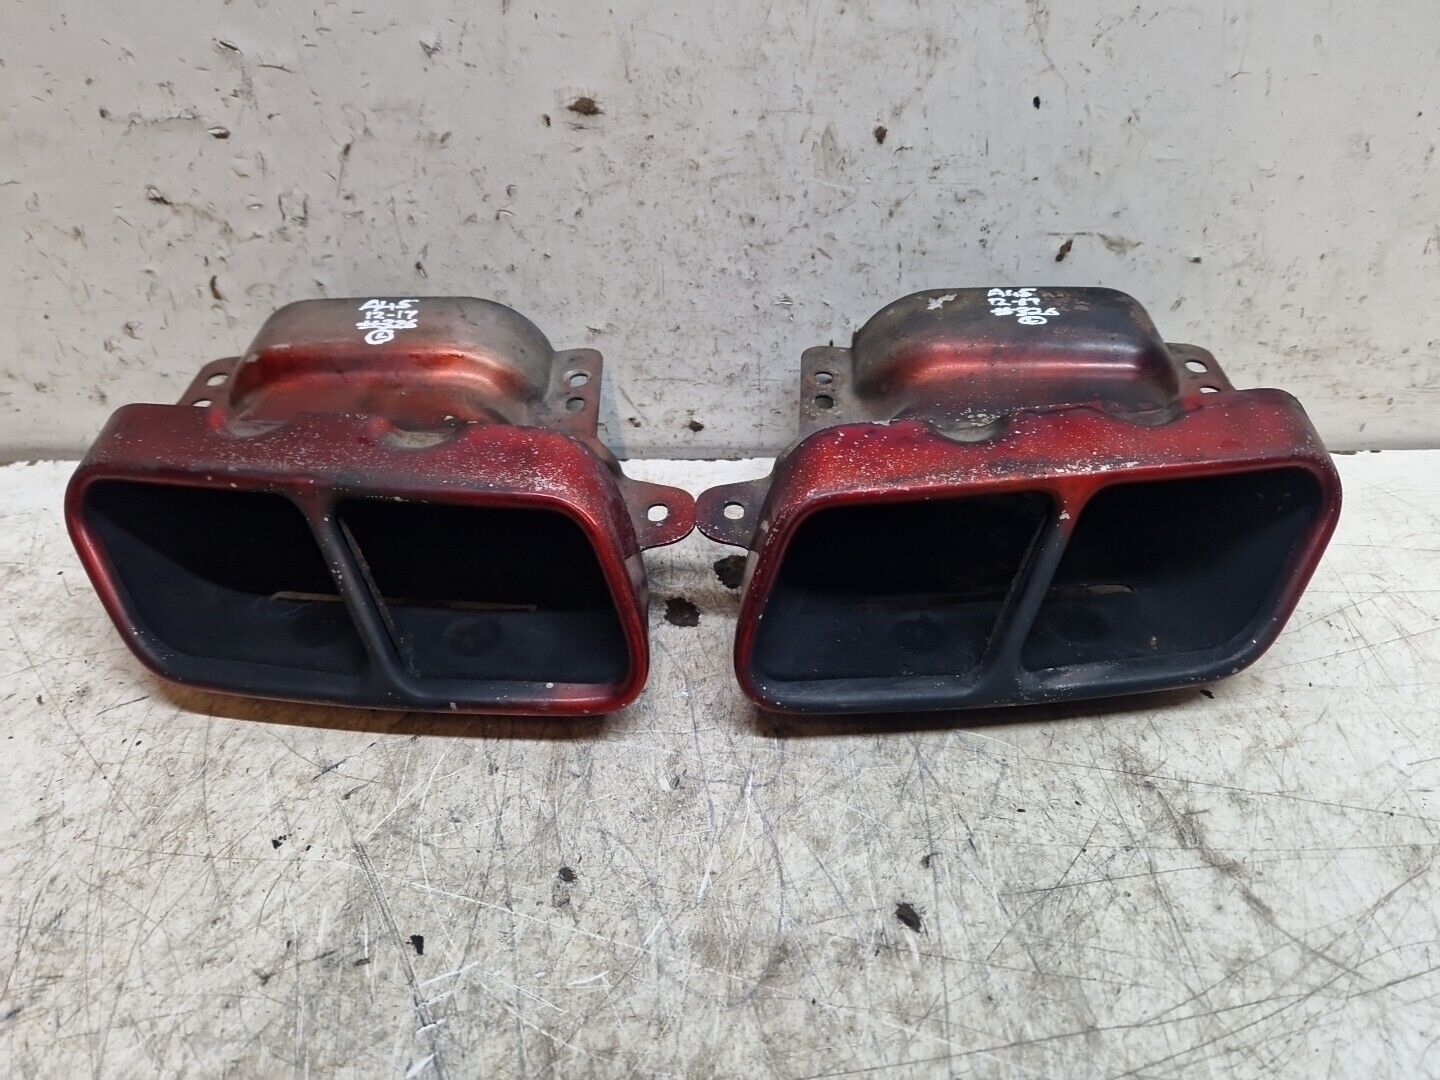 MERCEDES A45 AMG 2013-15 2.0 PETROL REAR DIFFUSER EXHAUST TIPS FLAPS #326